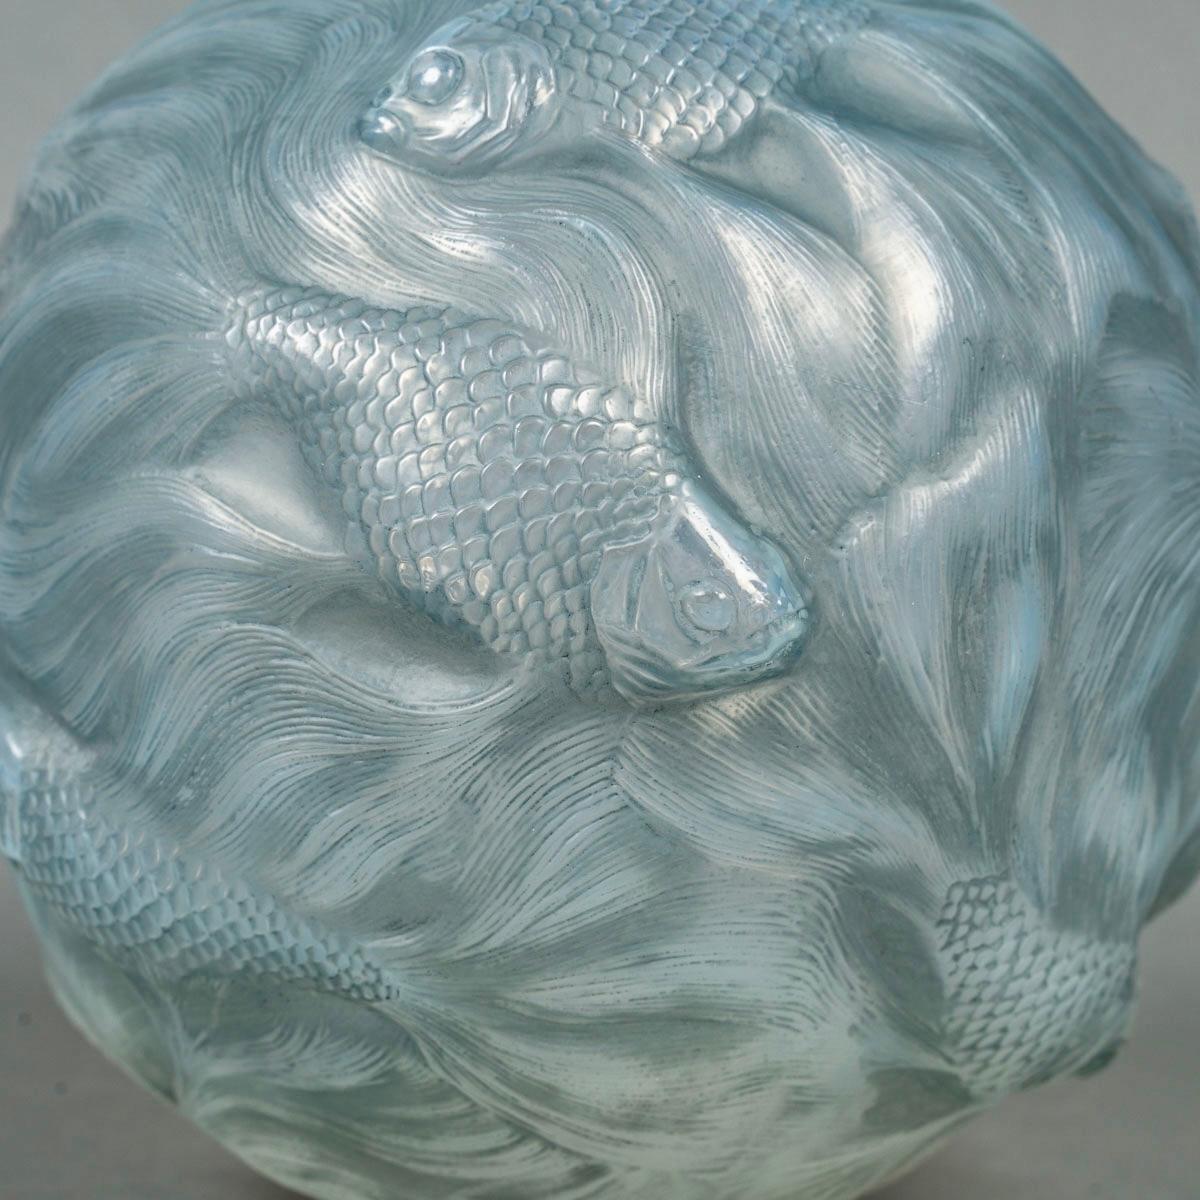 Art Deco 1924 Rene Lalique Vase Formose Cased Opalescent Glass with Blue Patina For Sale